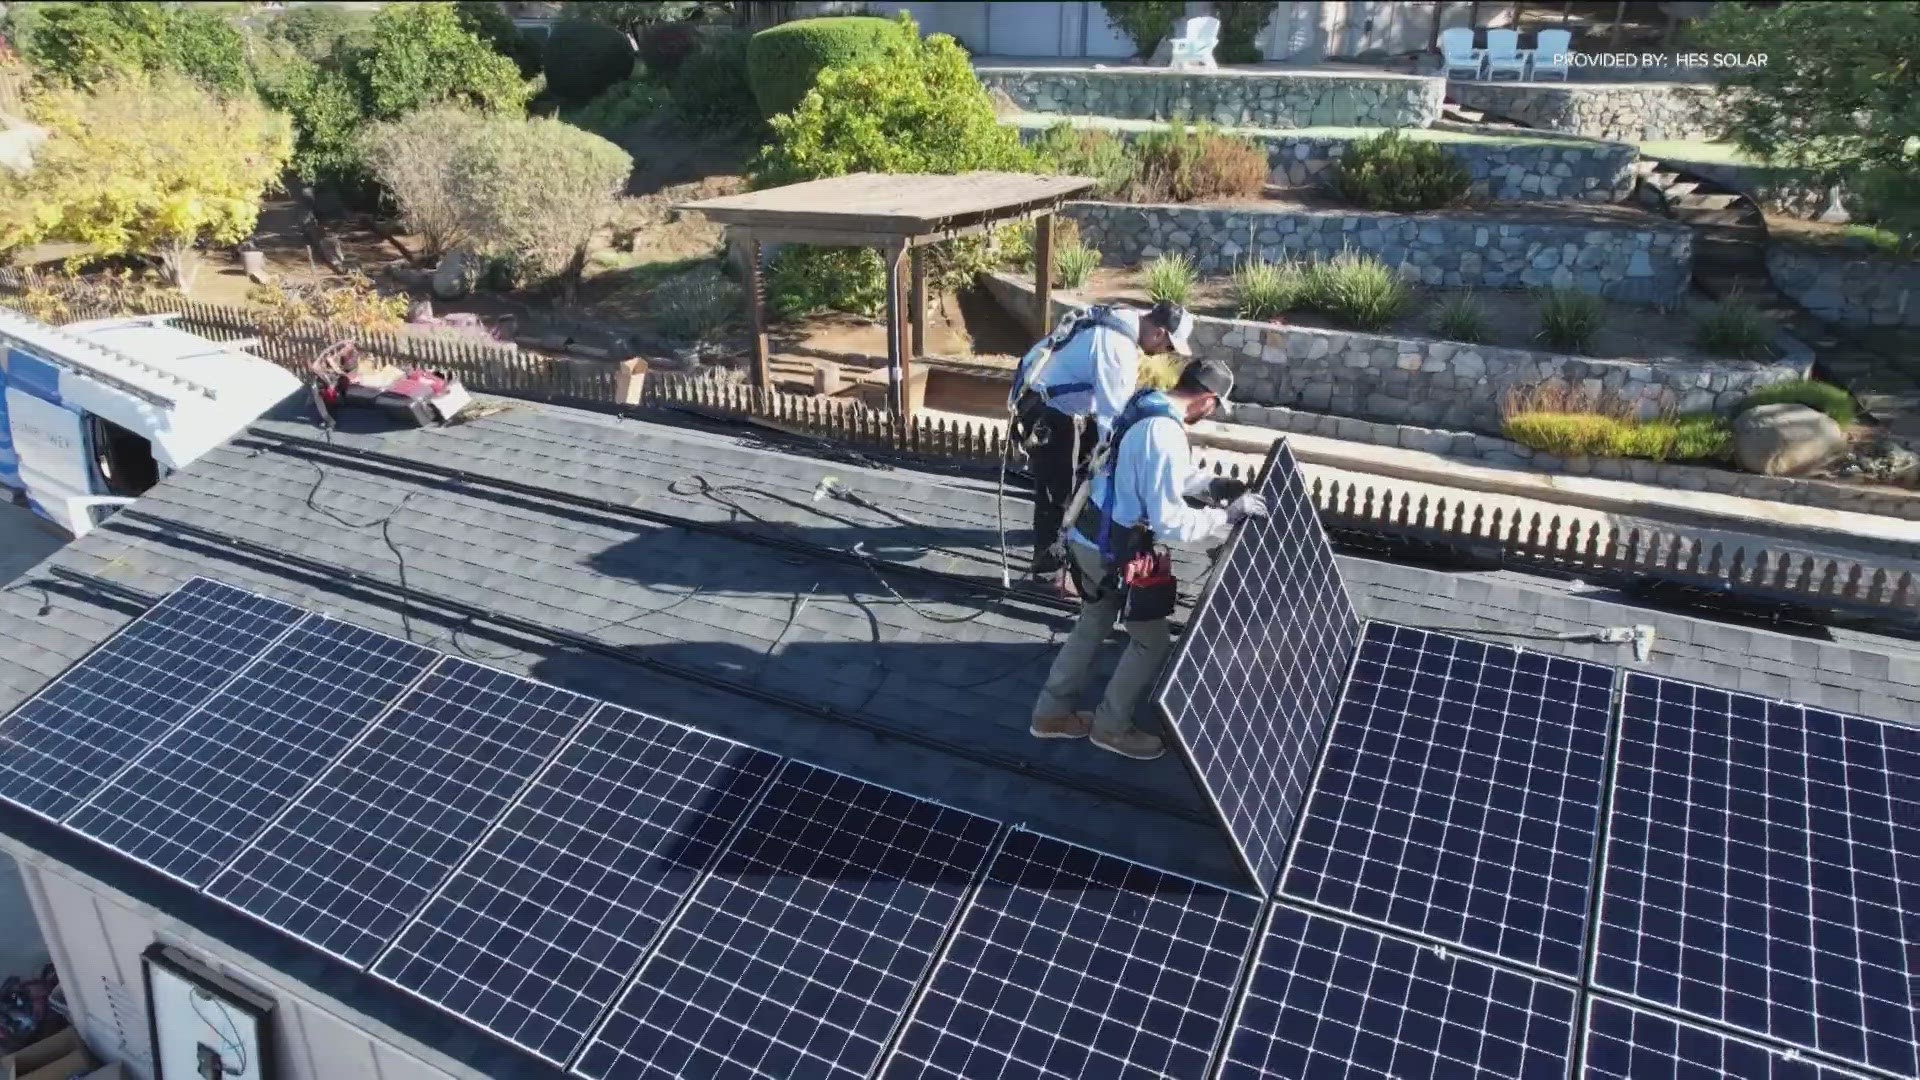 A decision by the California Public Utilities Commission will make it much more expensive to get rooftop solar starting April 15th.